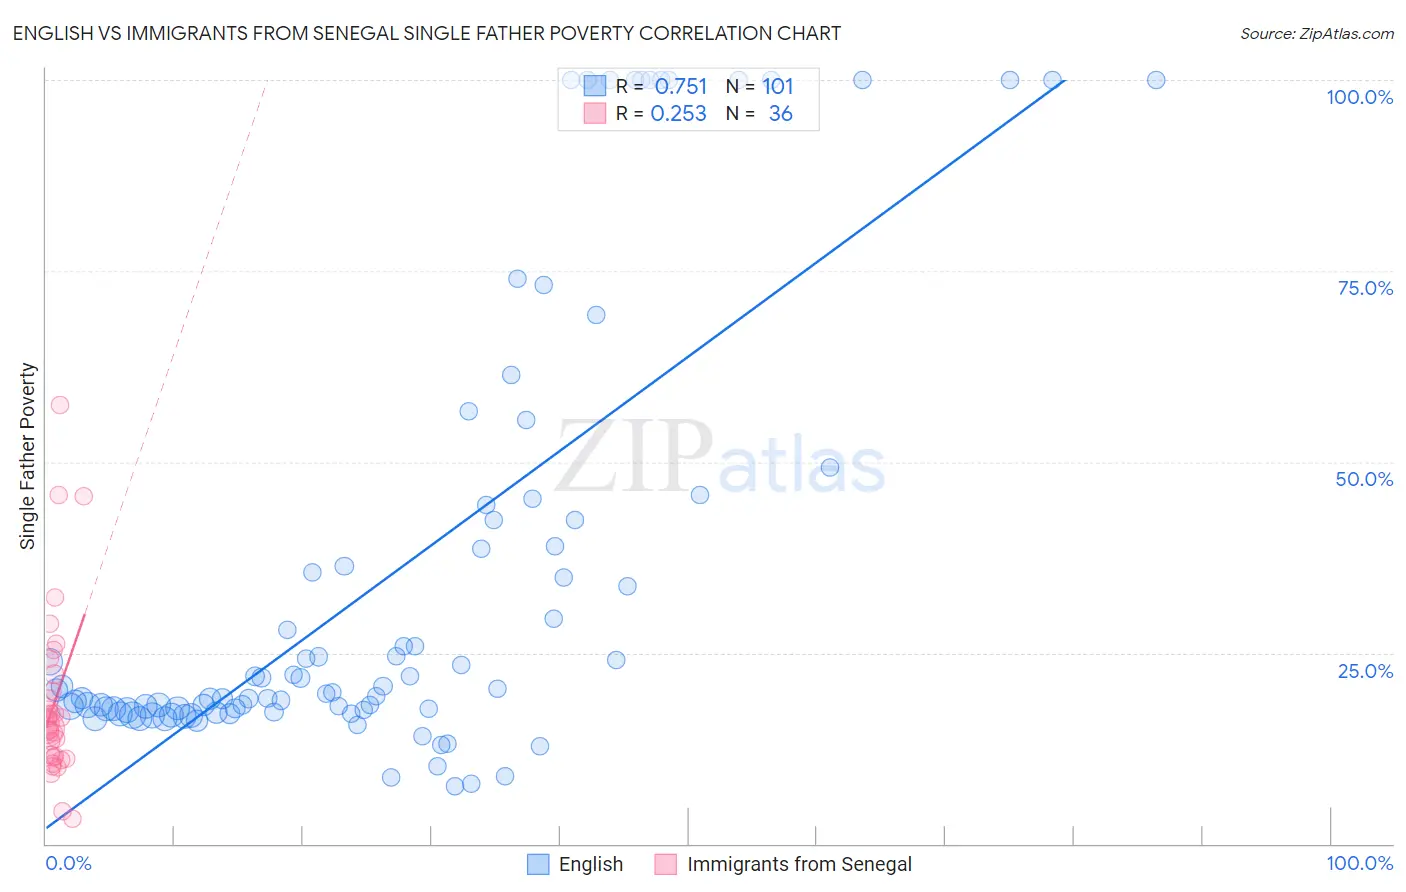 English vs Immigrants from Senegal Single Father Poverty